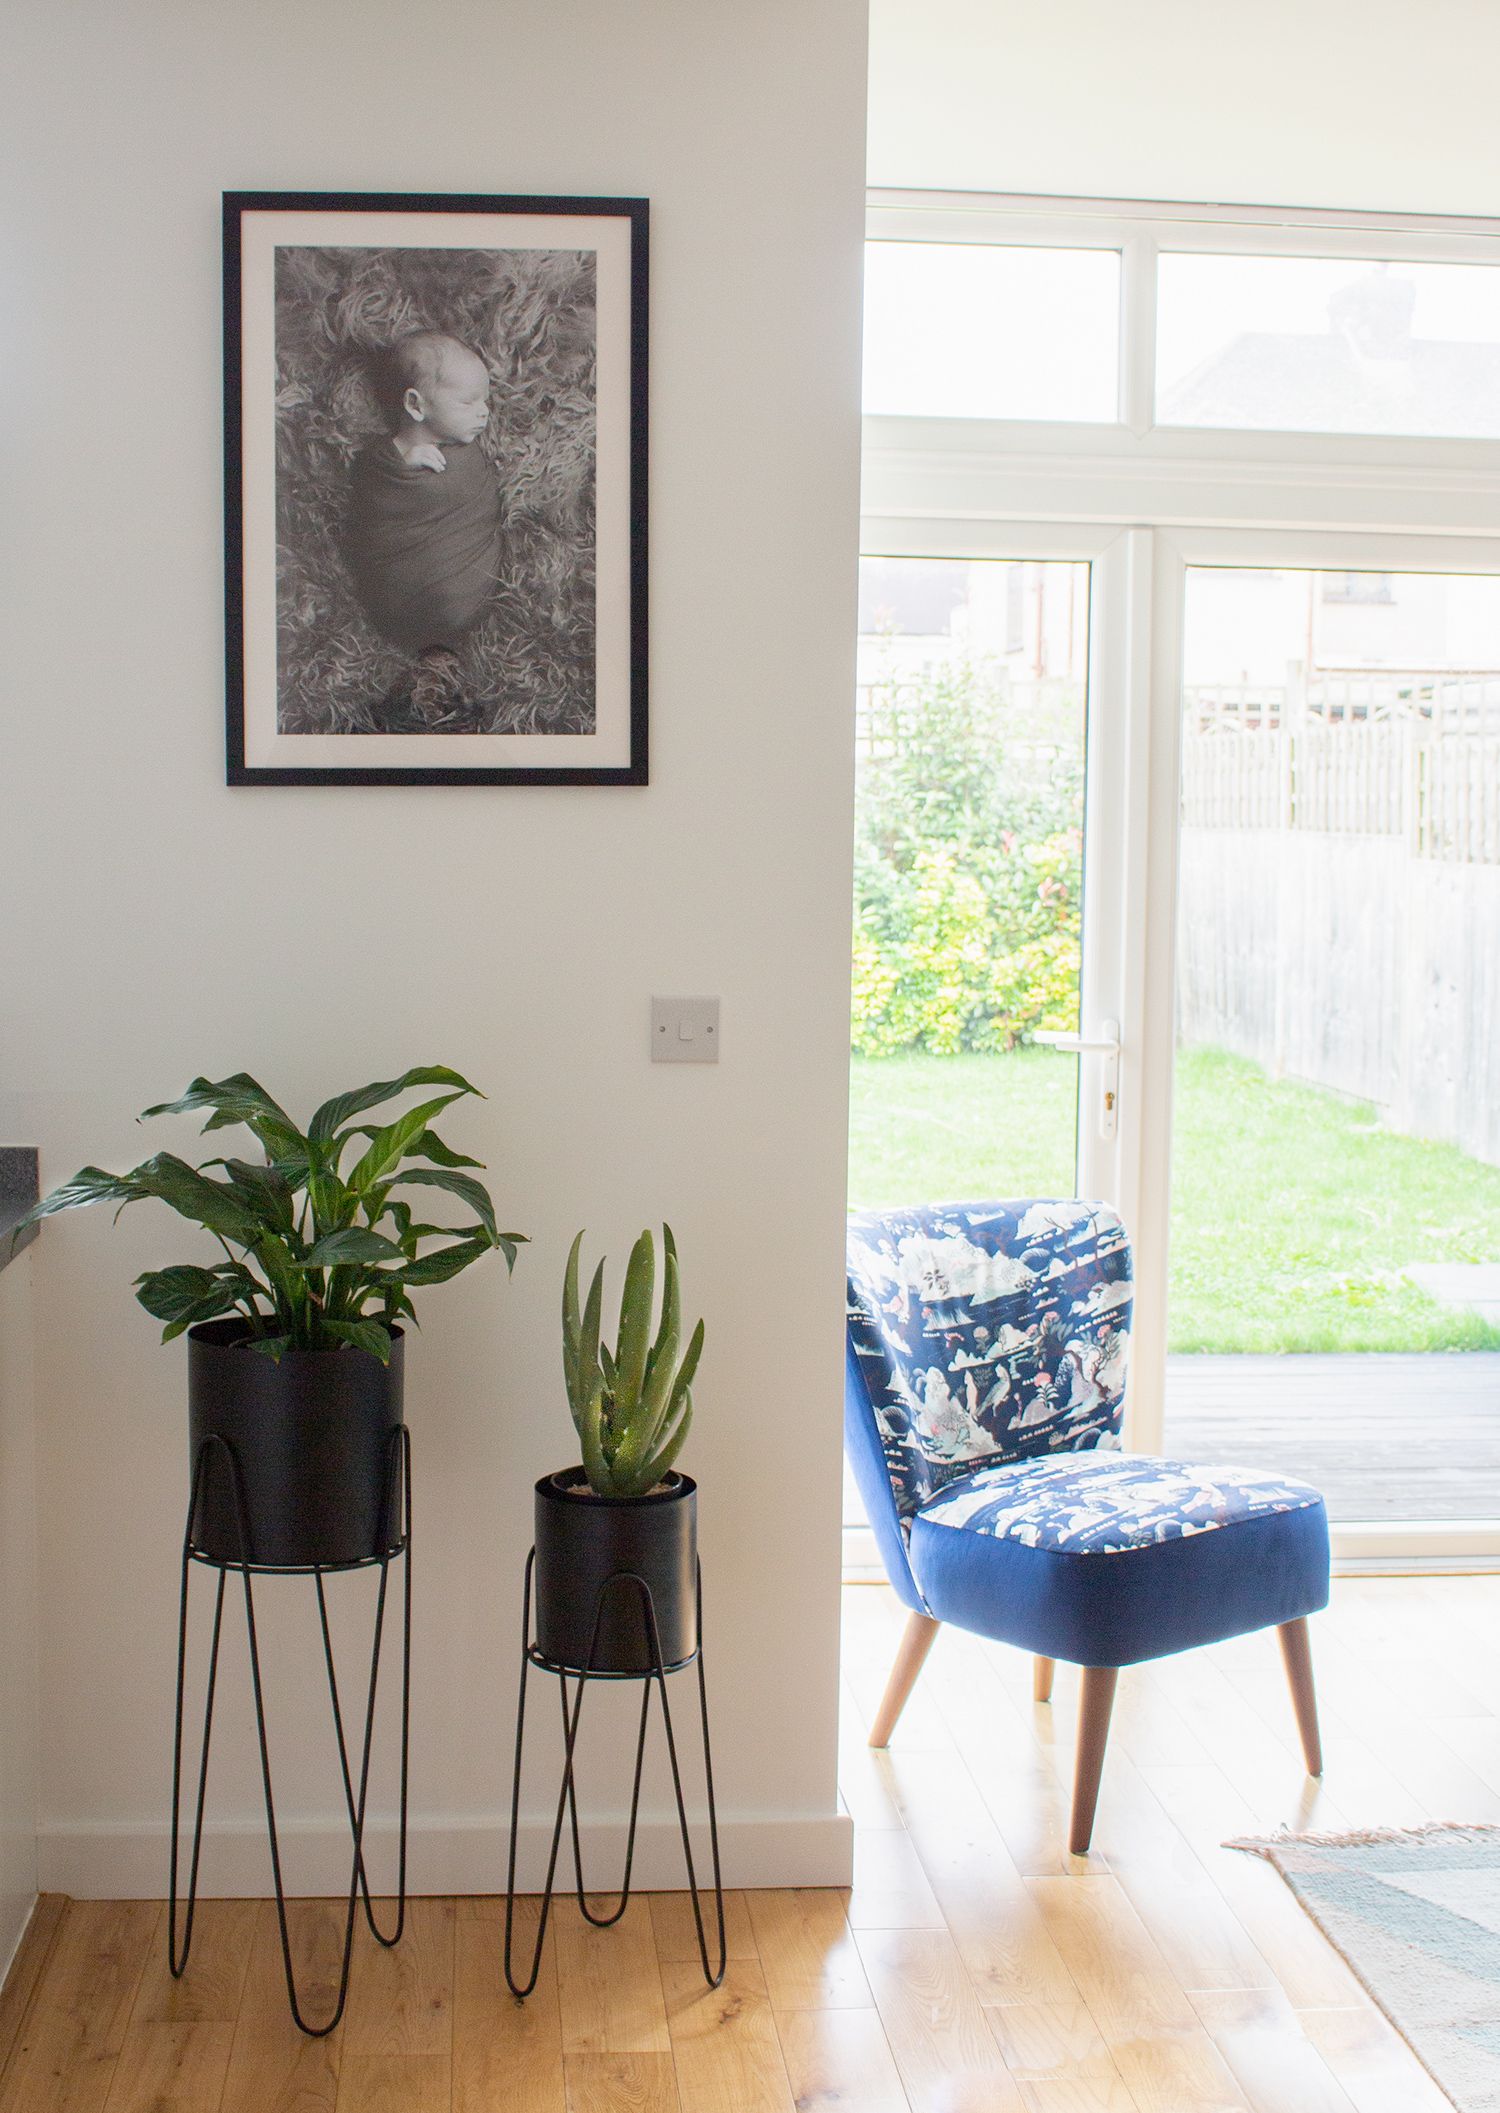 A photo of the chair by the windows, with two black planters and a personal photo on the wall.